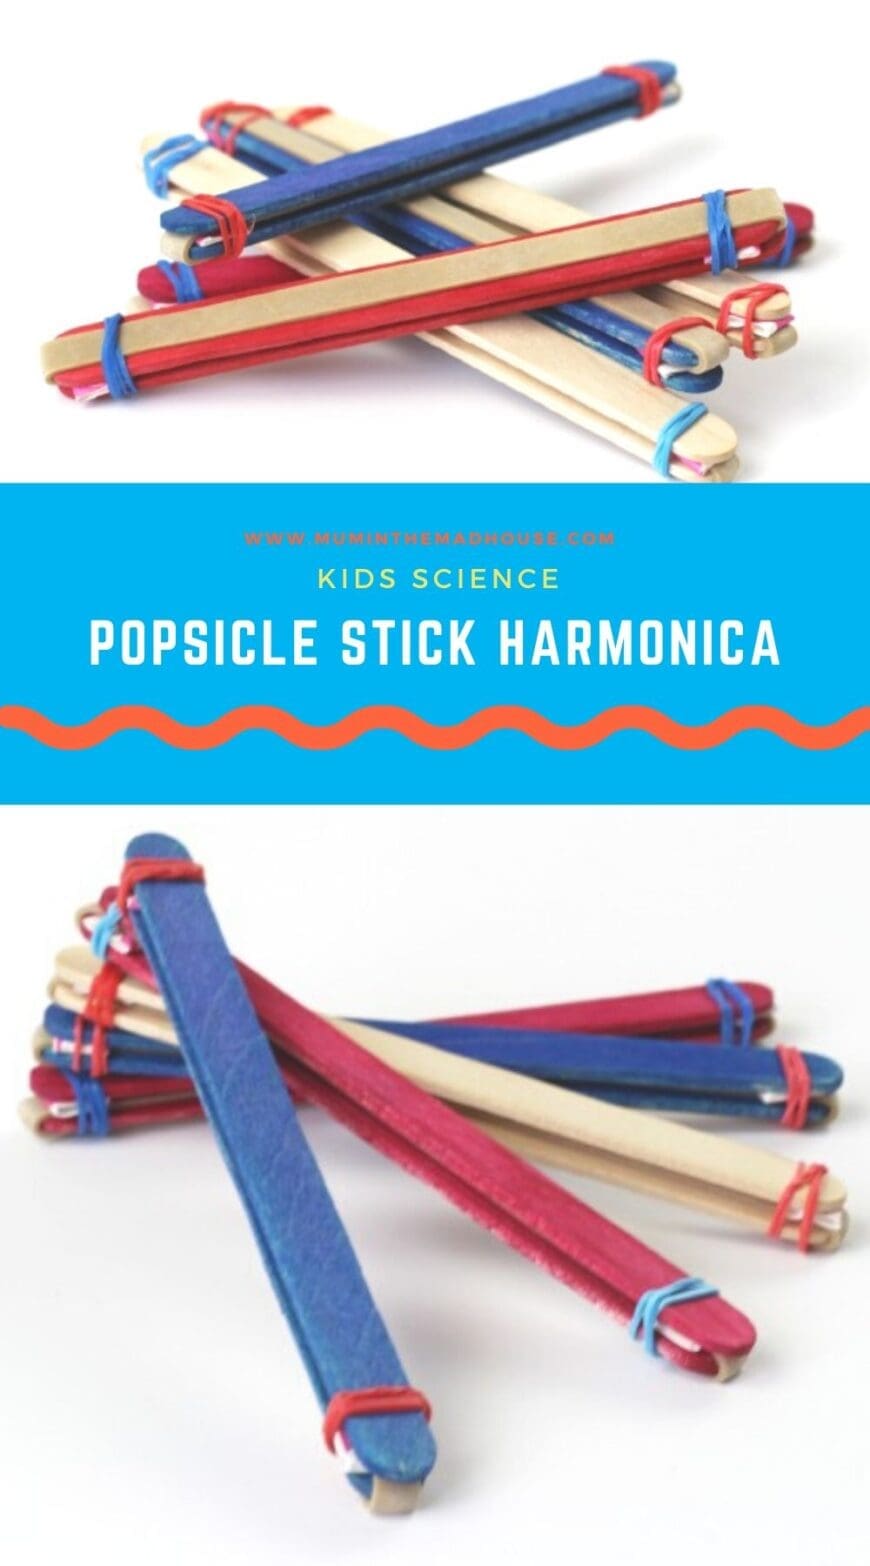 Popsicle stick Harmonica - a simple DIY musical instrument your kids can make